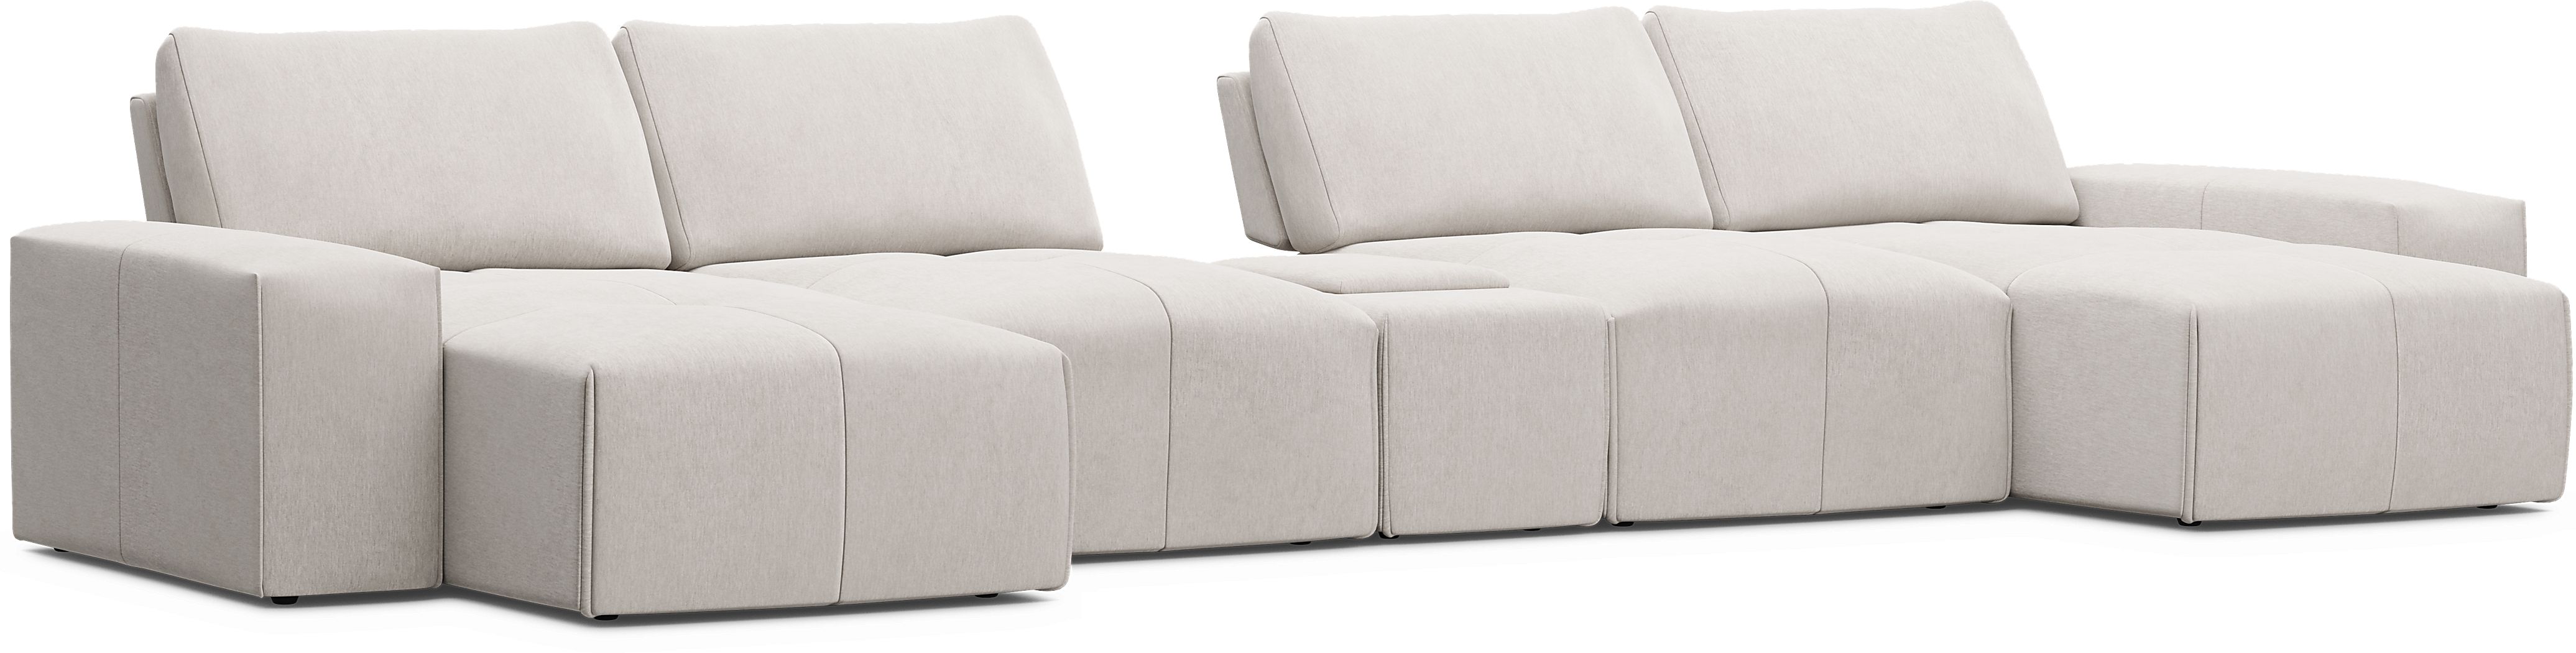 Laney Beige 5 Pc Sectional